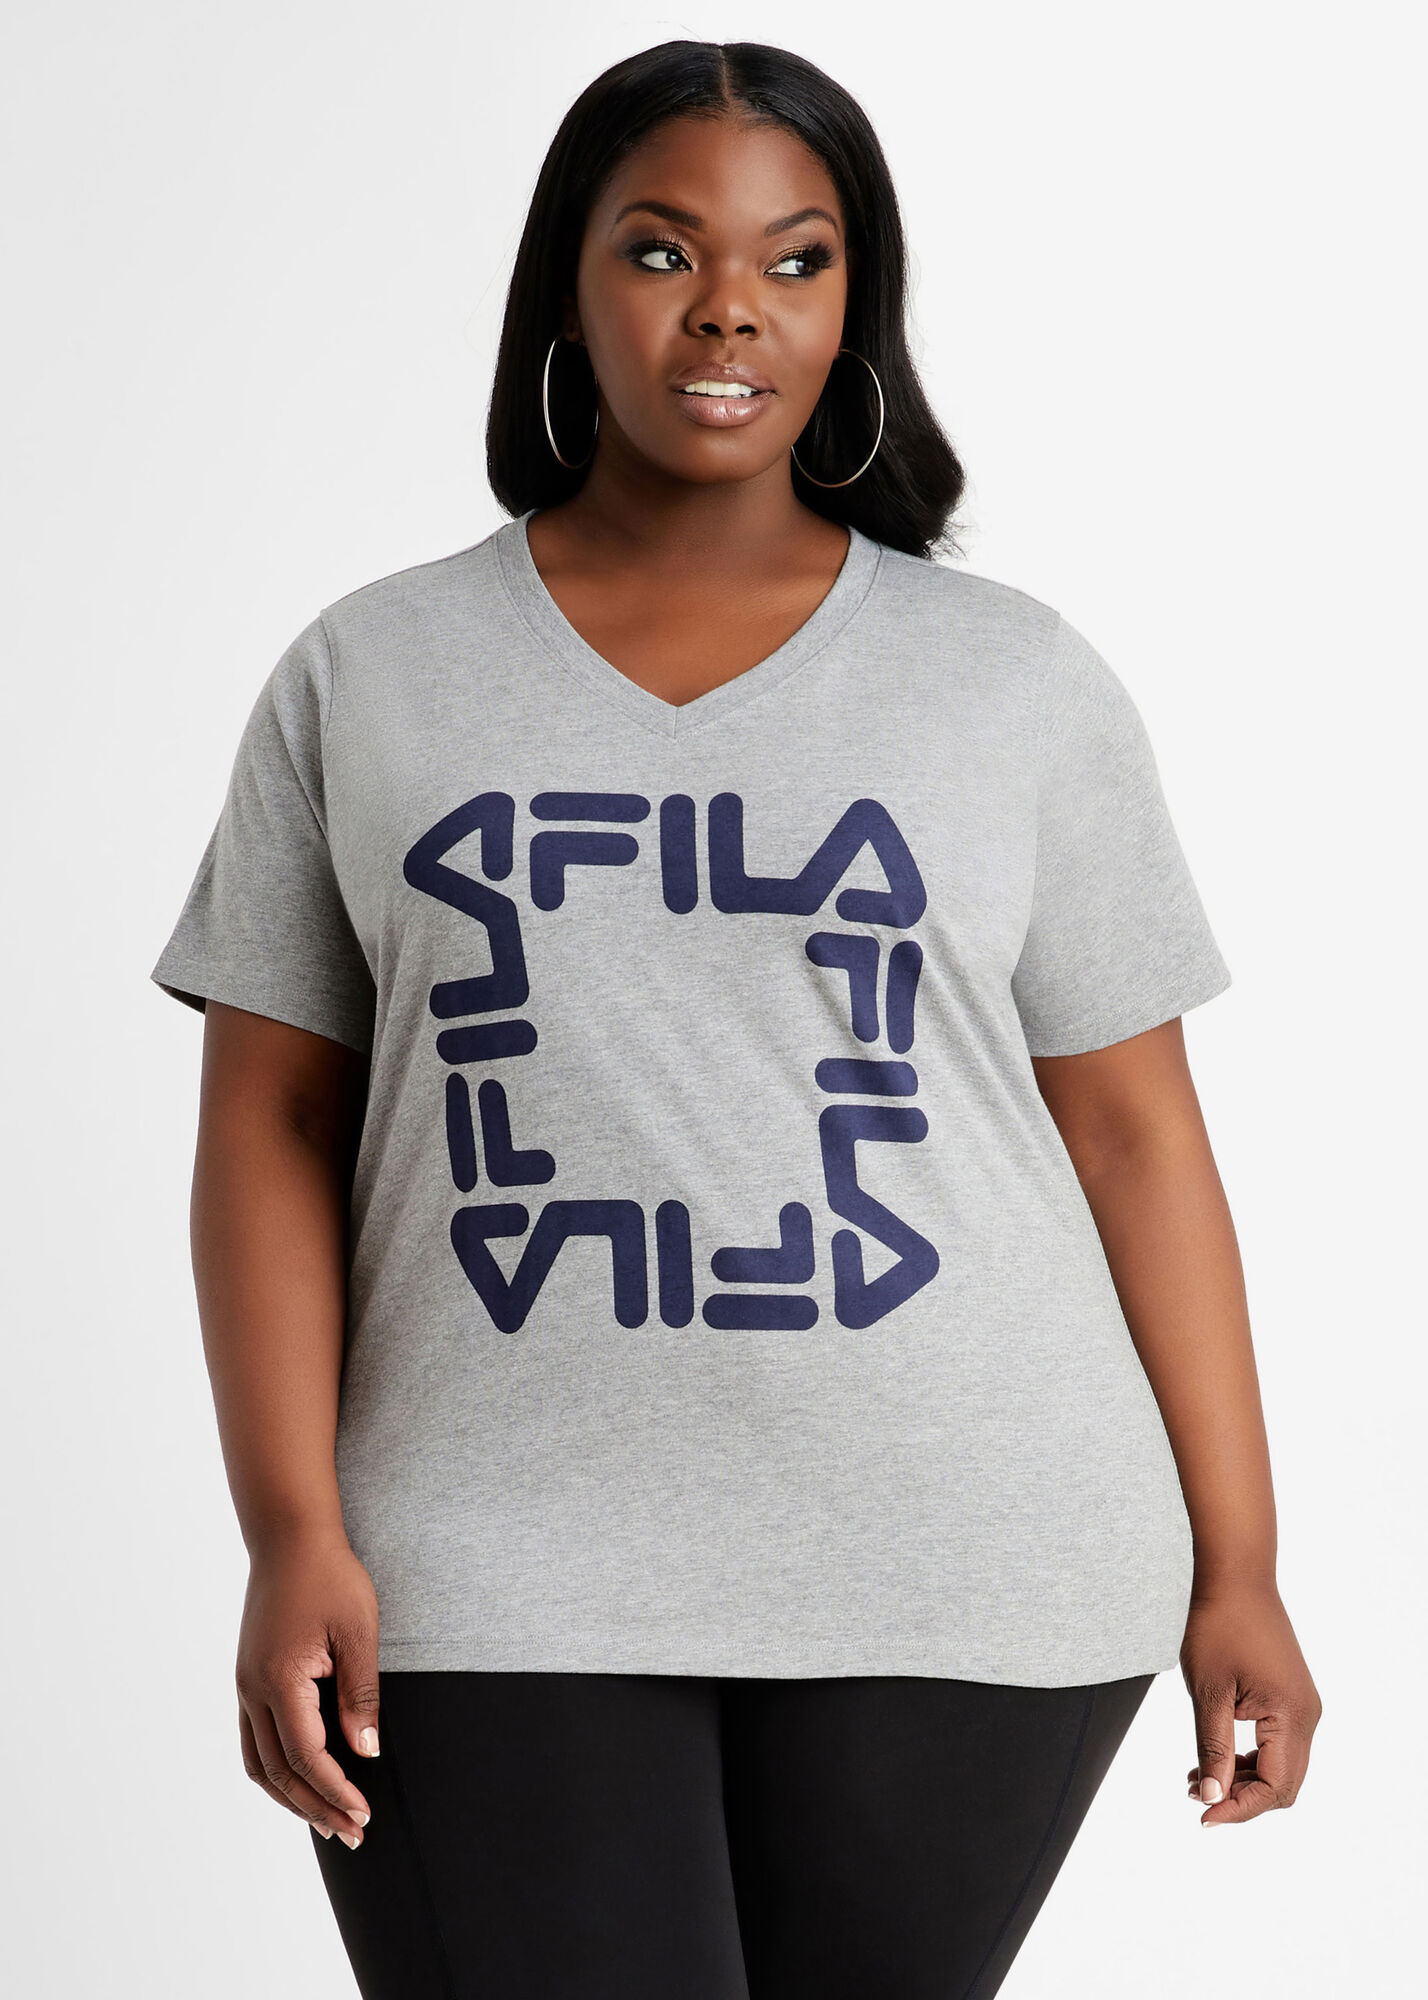 Plus Size FILA Curve Tee Plus Womens Work Out Tops & Clothing